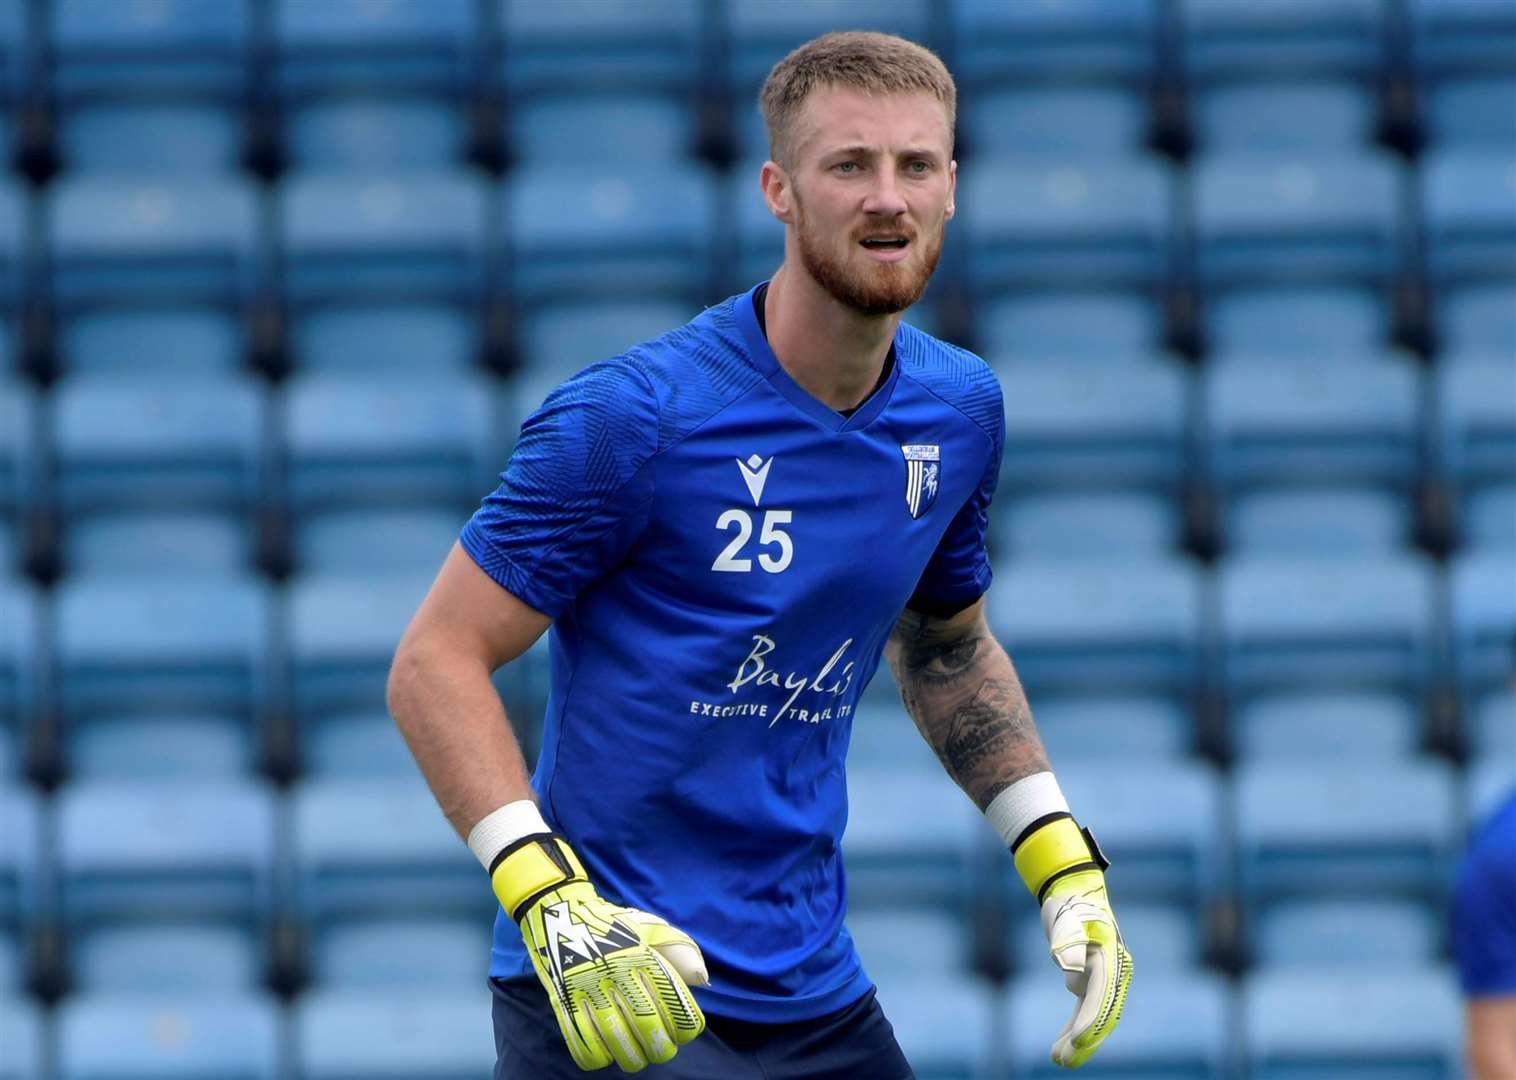 Keeper Jake Turner.Gillingham FC hold an open training session at the Priestfield stadium, allowing fans to watch from the Gordon Road stand.Gillingham FC, Priestfield stadium, Redfern Ave, Gillingham.Picture: Barry Goodwin